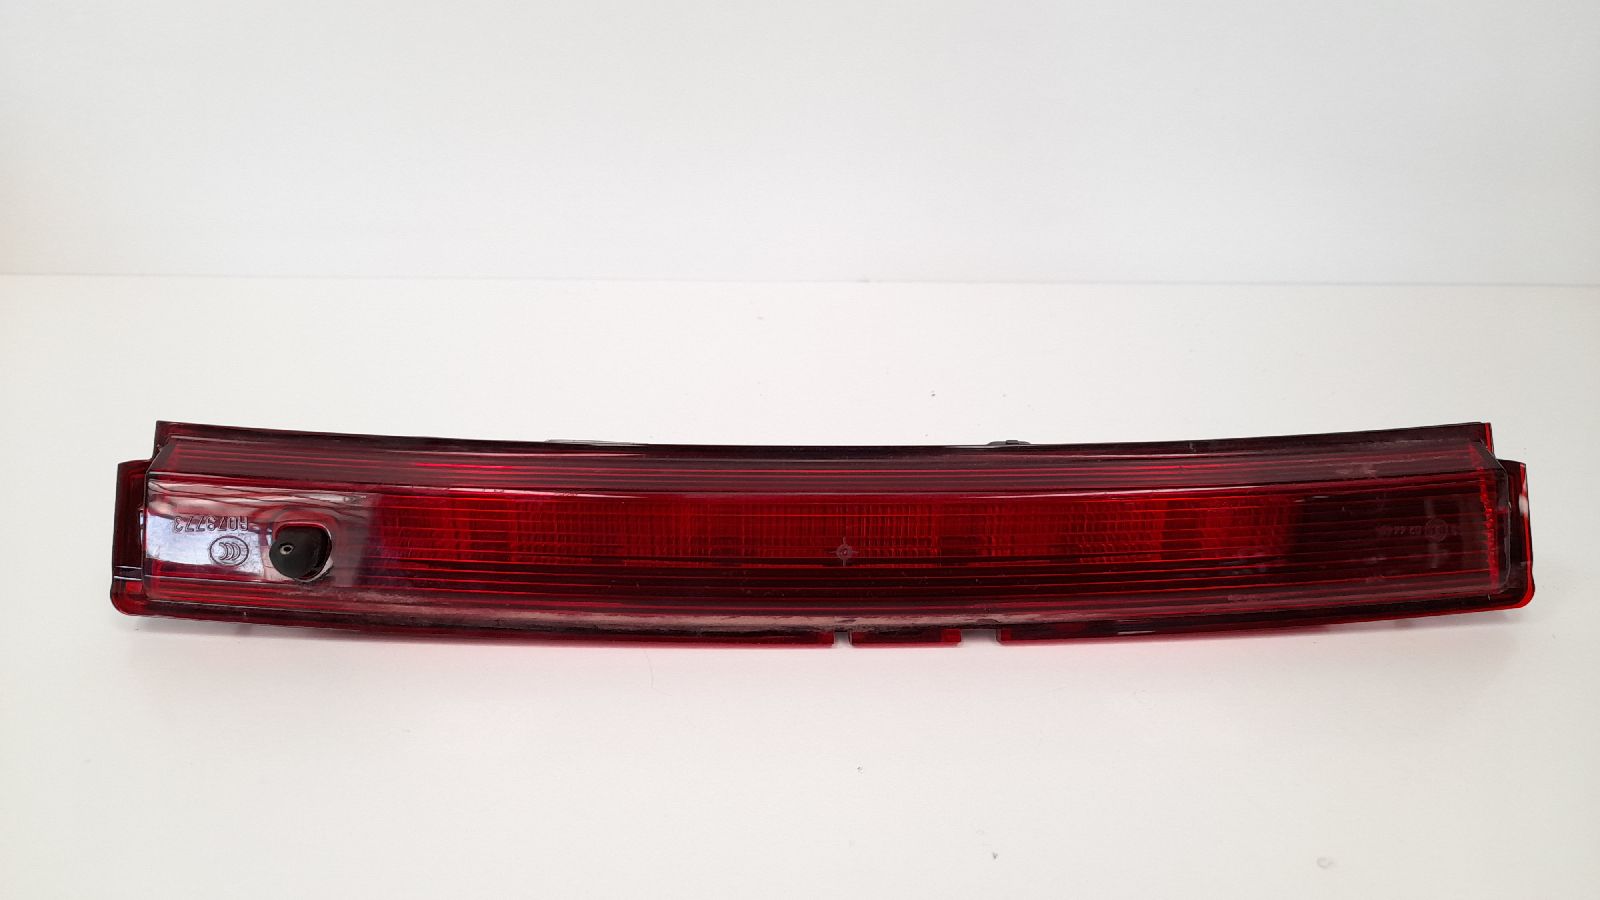 RENAULT Clio 3 generation (2005-2012) Rear cover light 265902759R 22740285